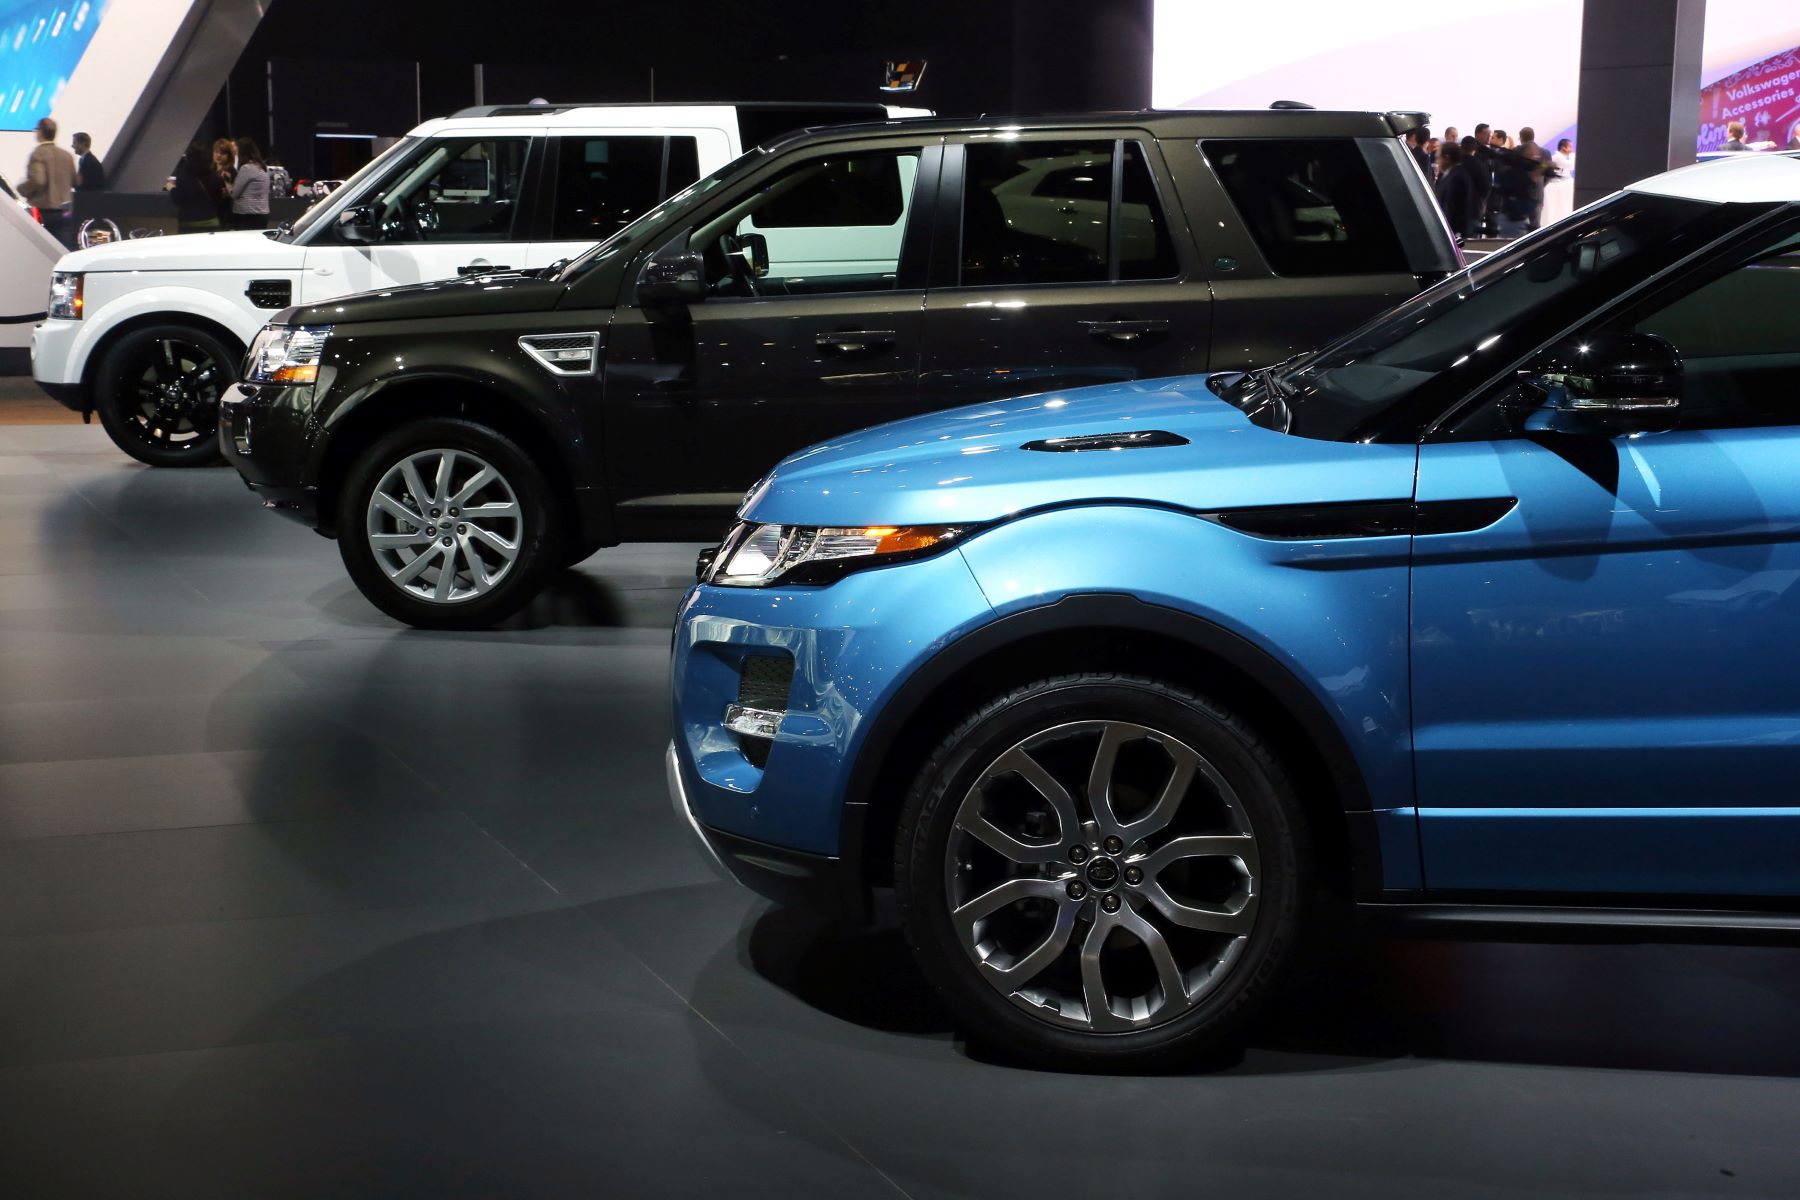 A lineup of Land Rover Vehicles seen at the LA Auto Show